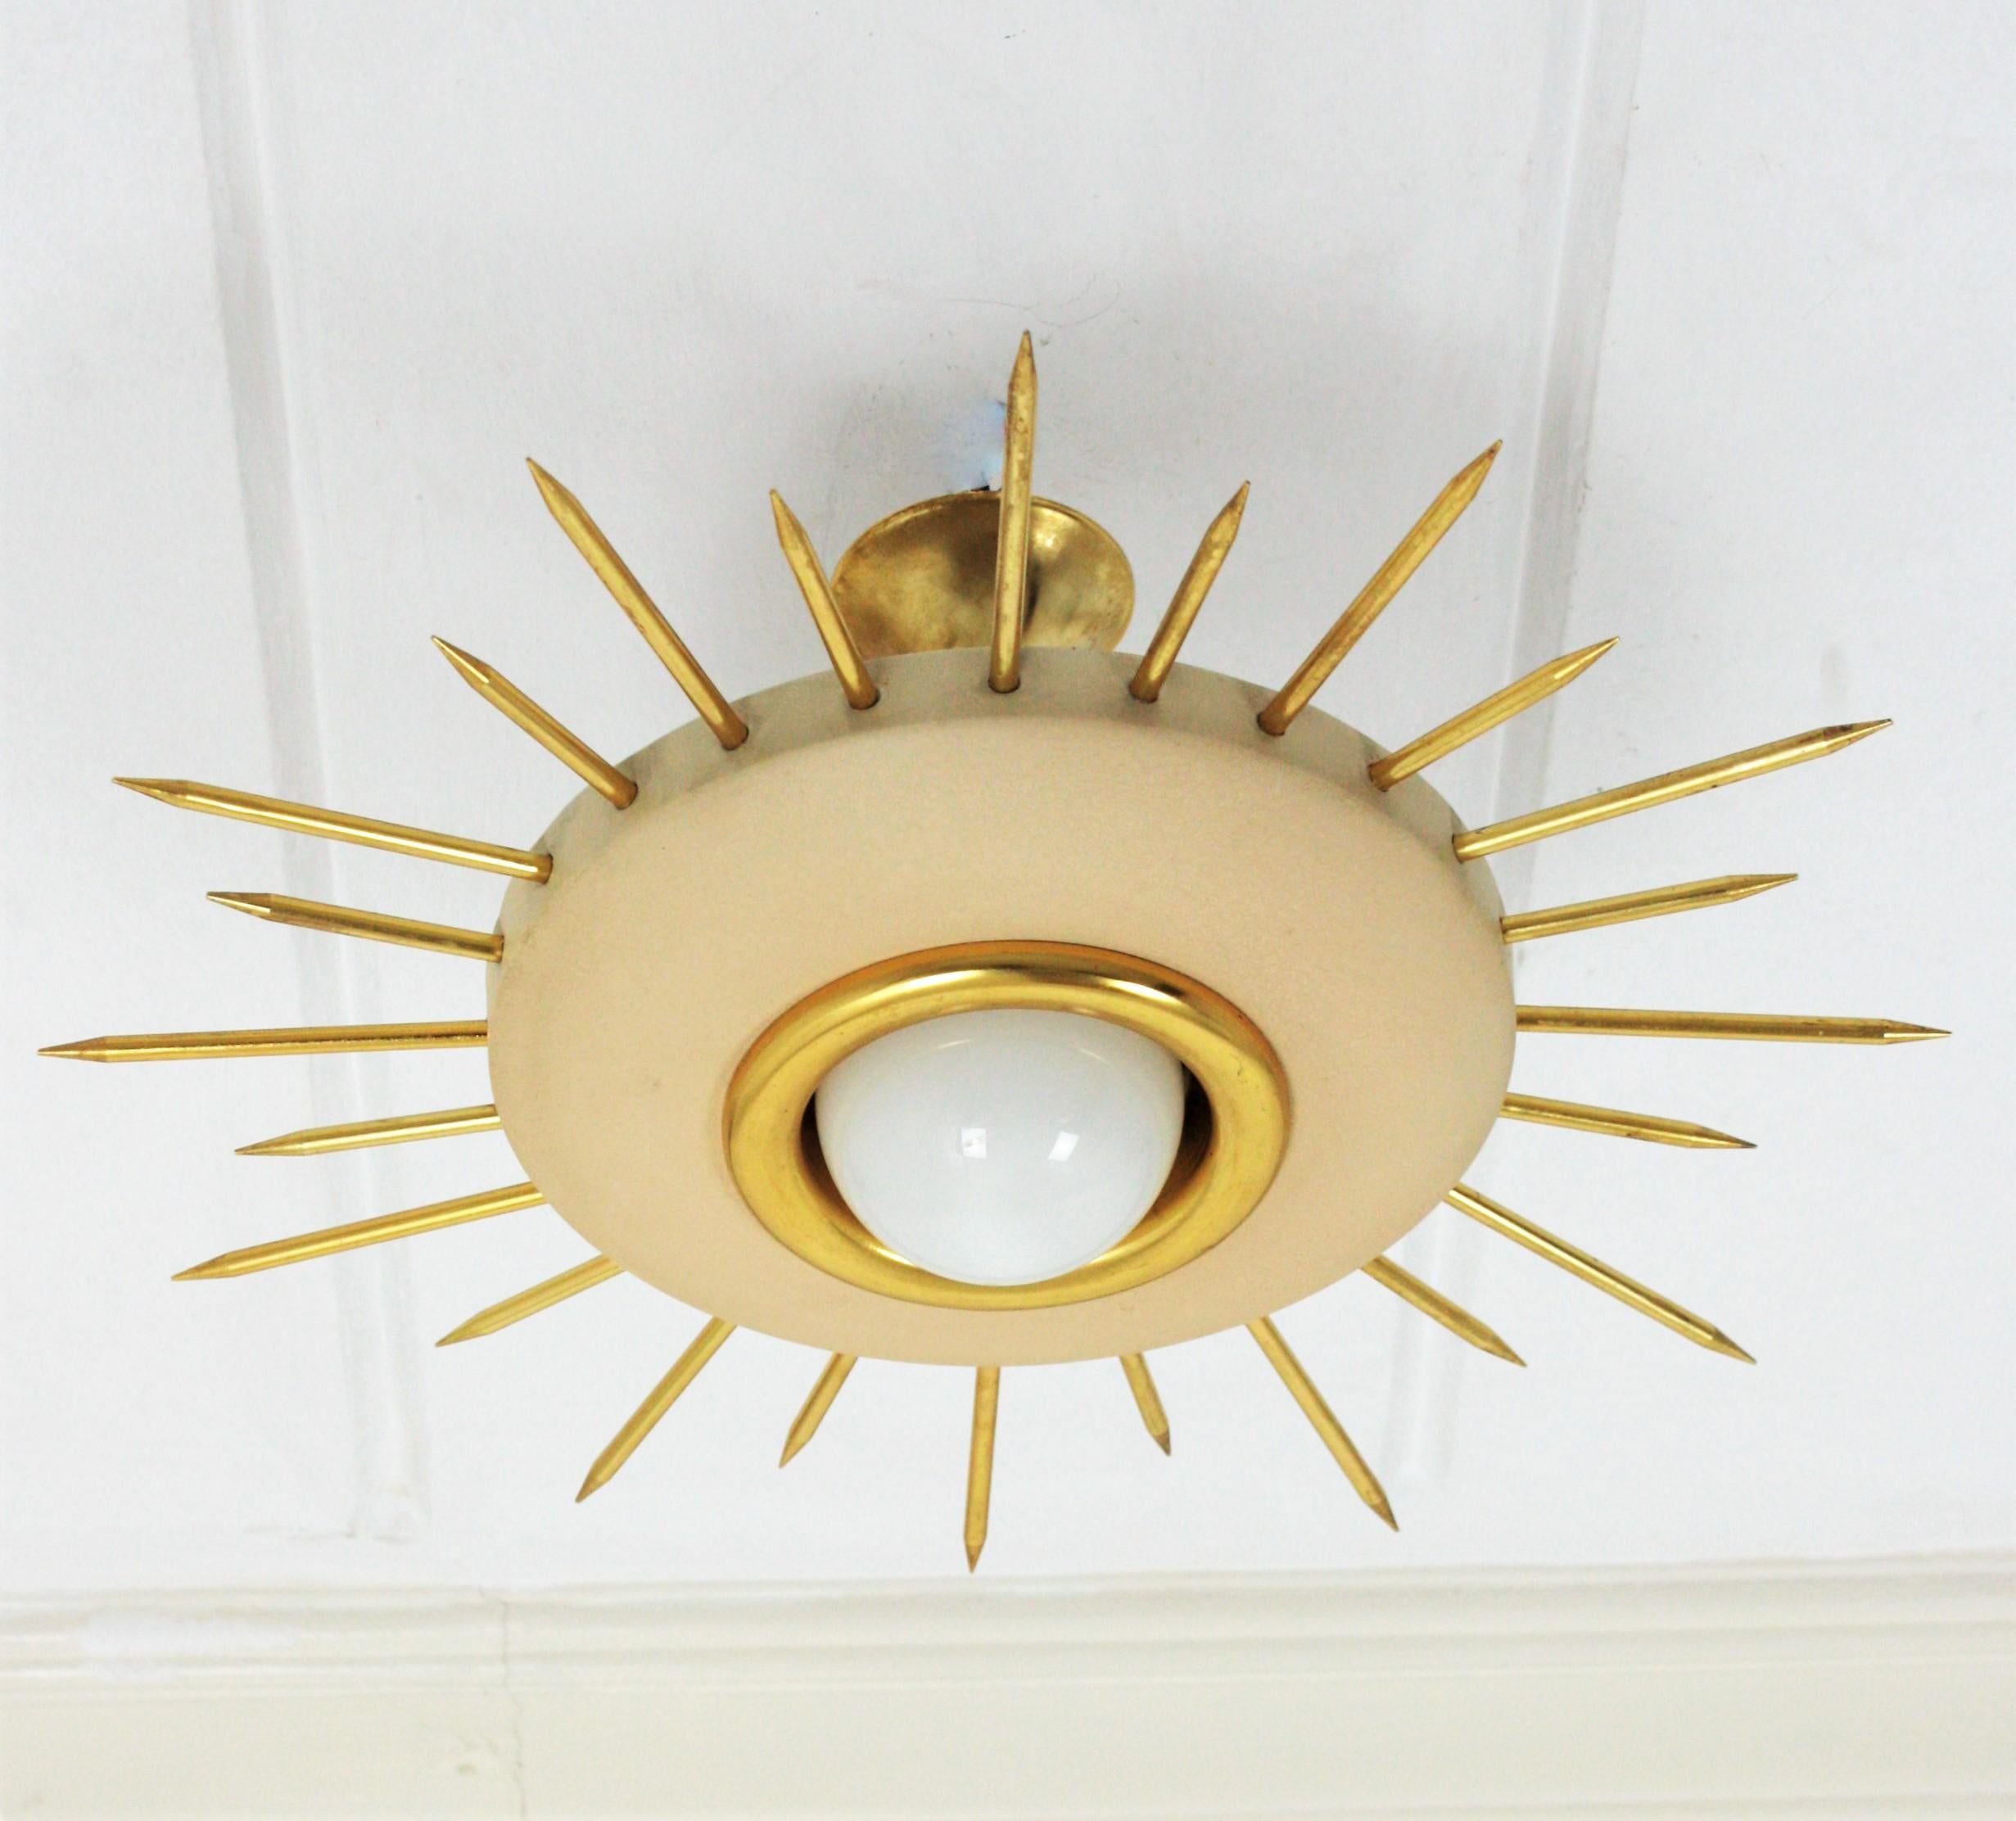 Mid-Century Modern beige lacquered and gilt metal sunburst light fixture, Italy, 1950s.
This eye-catching ceiling lamp features a beige metal shade surrounded by gilded thick rays in two sizes. It has a central light with a ring in gilt metal and a